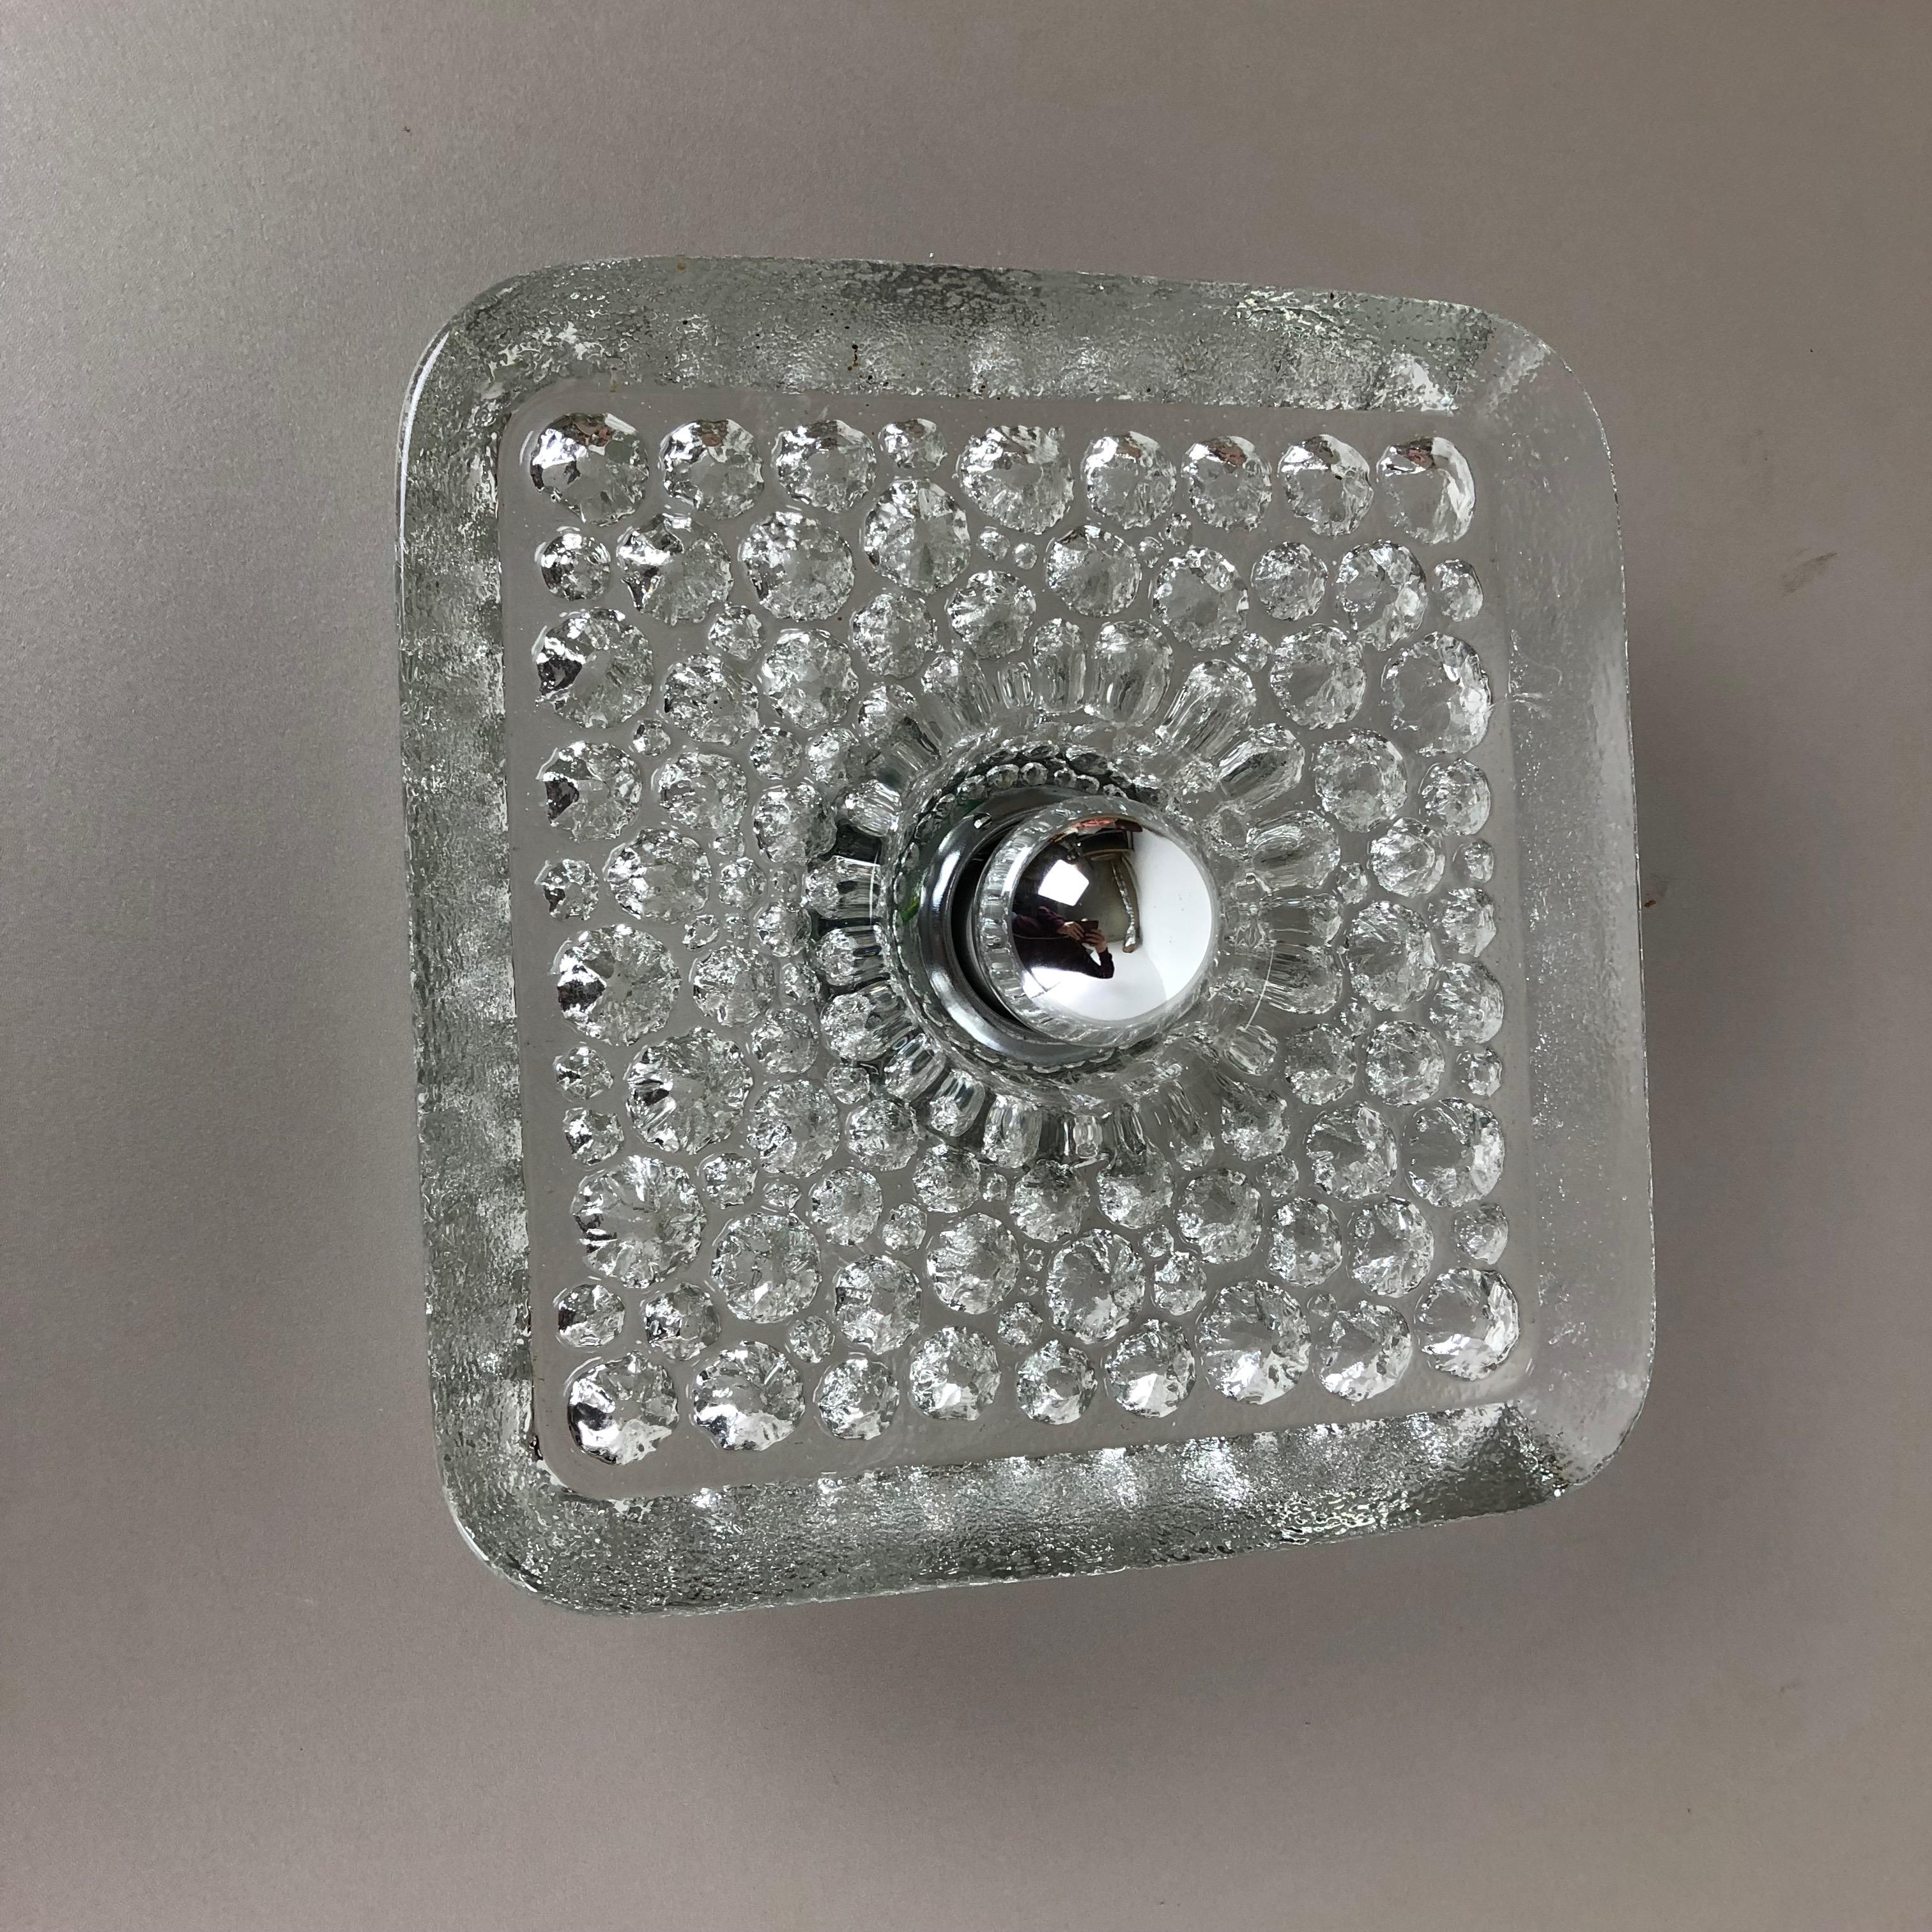 Article:

wall light 


Producer:

Peill and Putzler, Germany


Origin:

Germany



Age:

1970s



Original 1970s modernist German wall Light made of glass and metal. This super rare wall light was produced in the 1970s by the